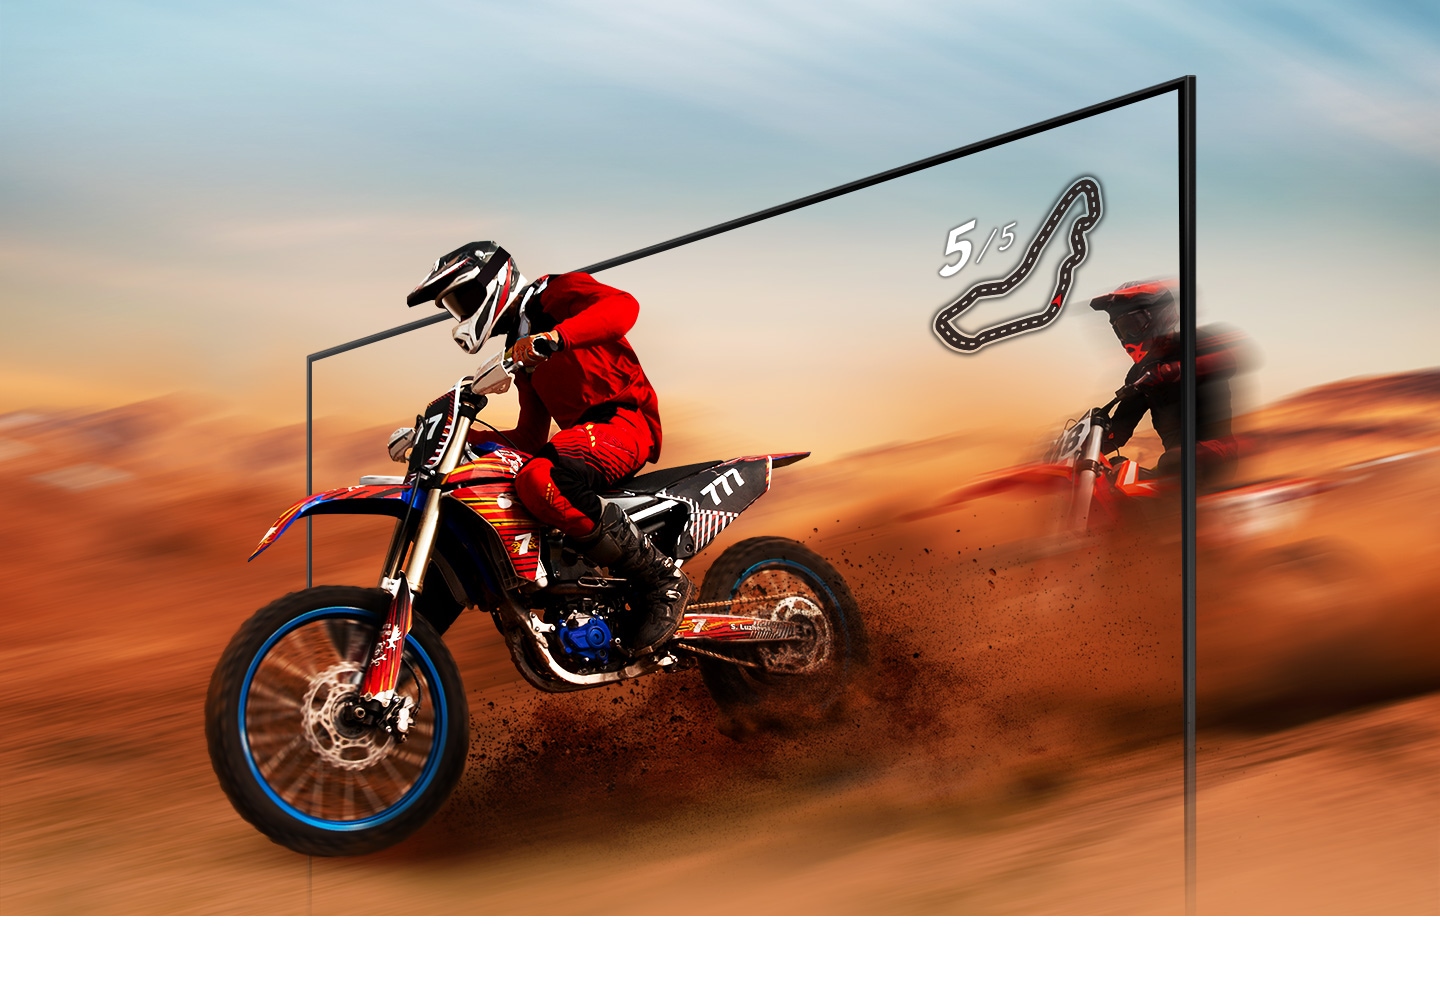 A dirt bike racer looks clear and visible inside the UHD TV screen because of UHD TV motion xcelerator technology.